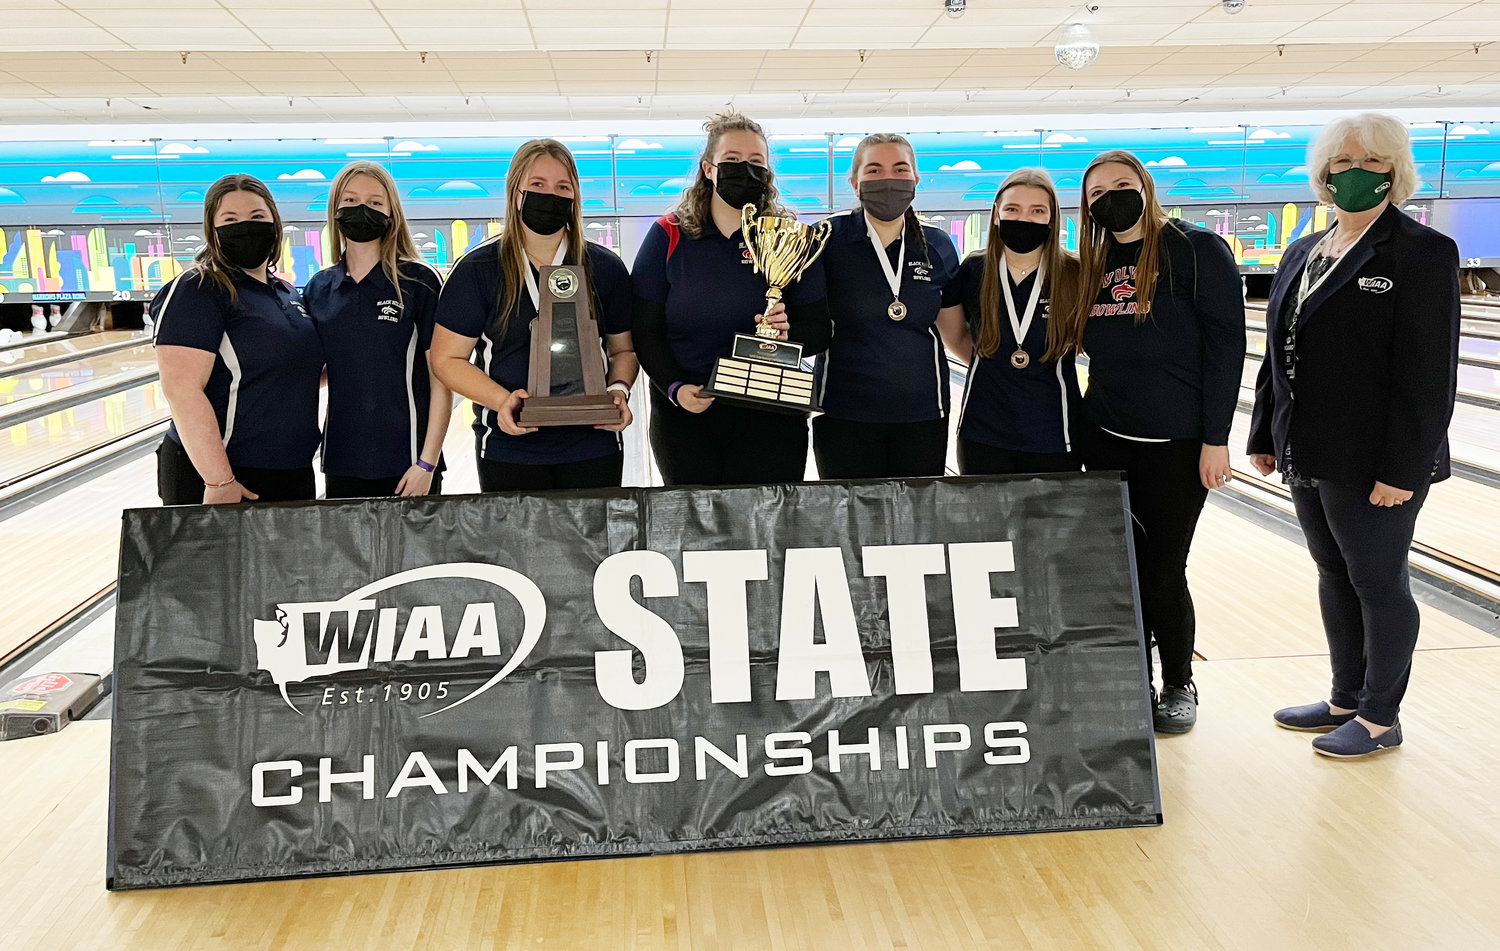 Black Hills girls bowling captured its first-ever state championship after beating runner-up Columbia River by 66 pins at the 1A/2A state tournament on Feb. 4 at Narrows Plaza Bowl.